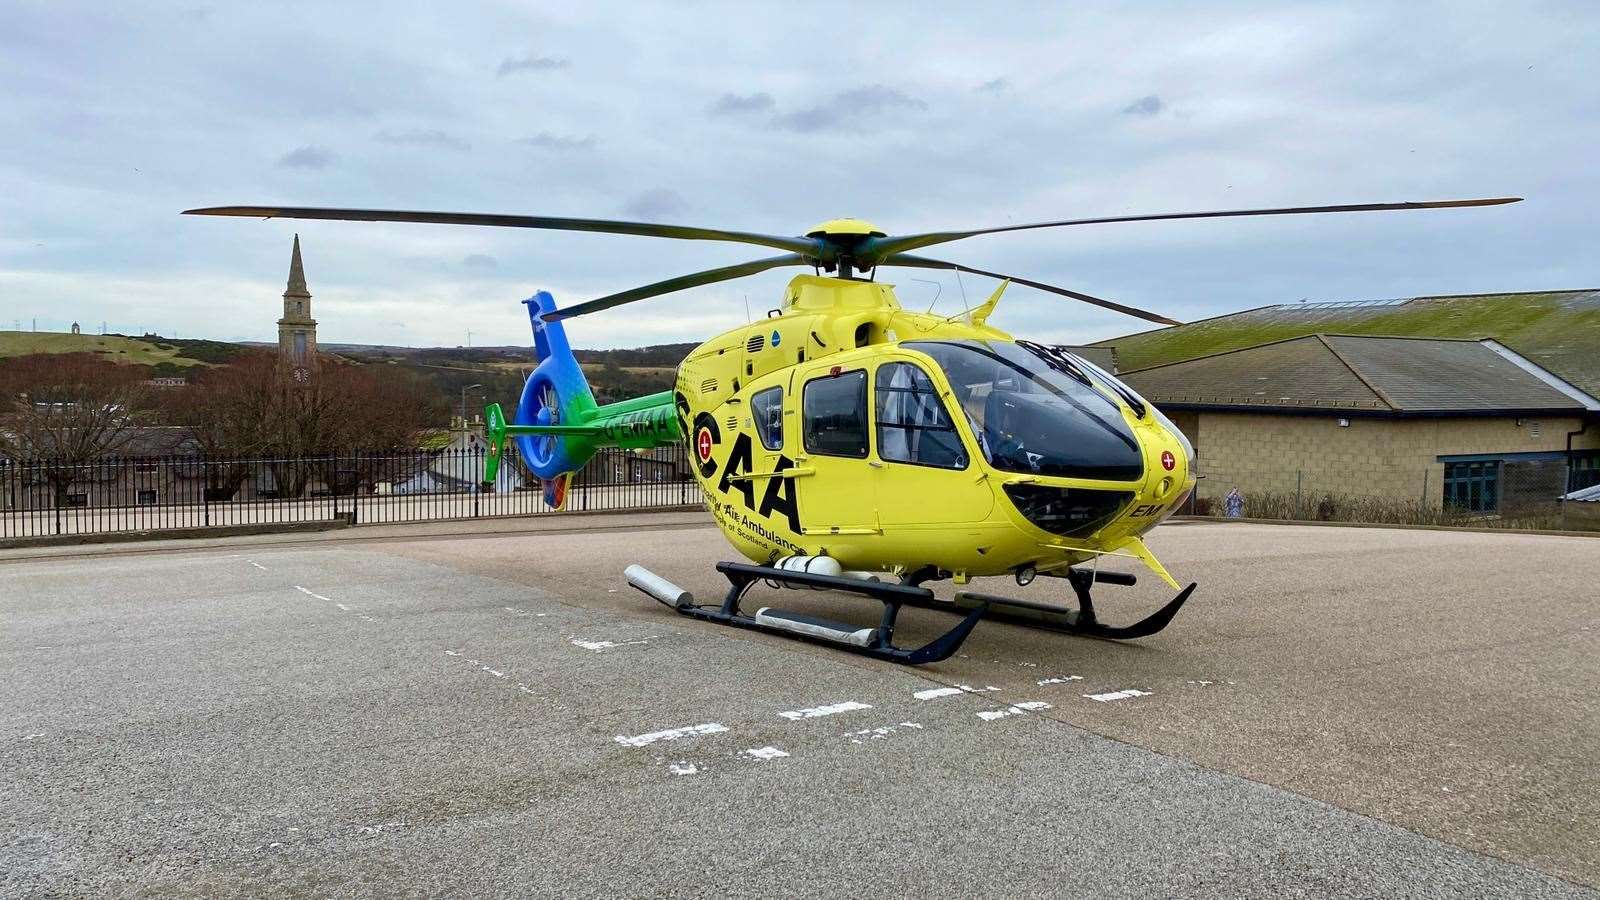 The Scottish Charity Air Ambulance's Helimed 79 landed within the grounds of Banff Primary School around midday on Thursday.